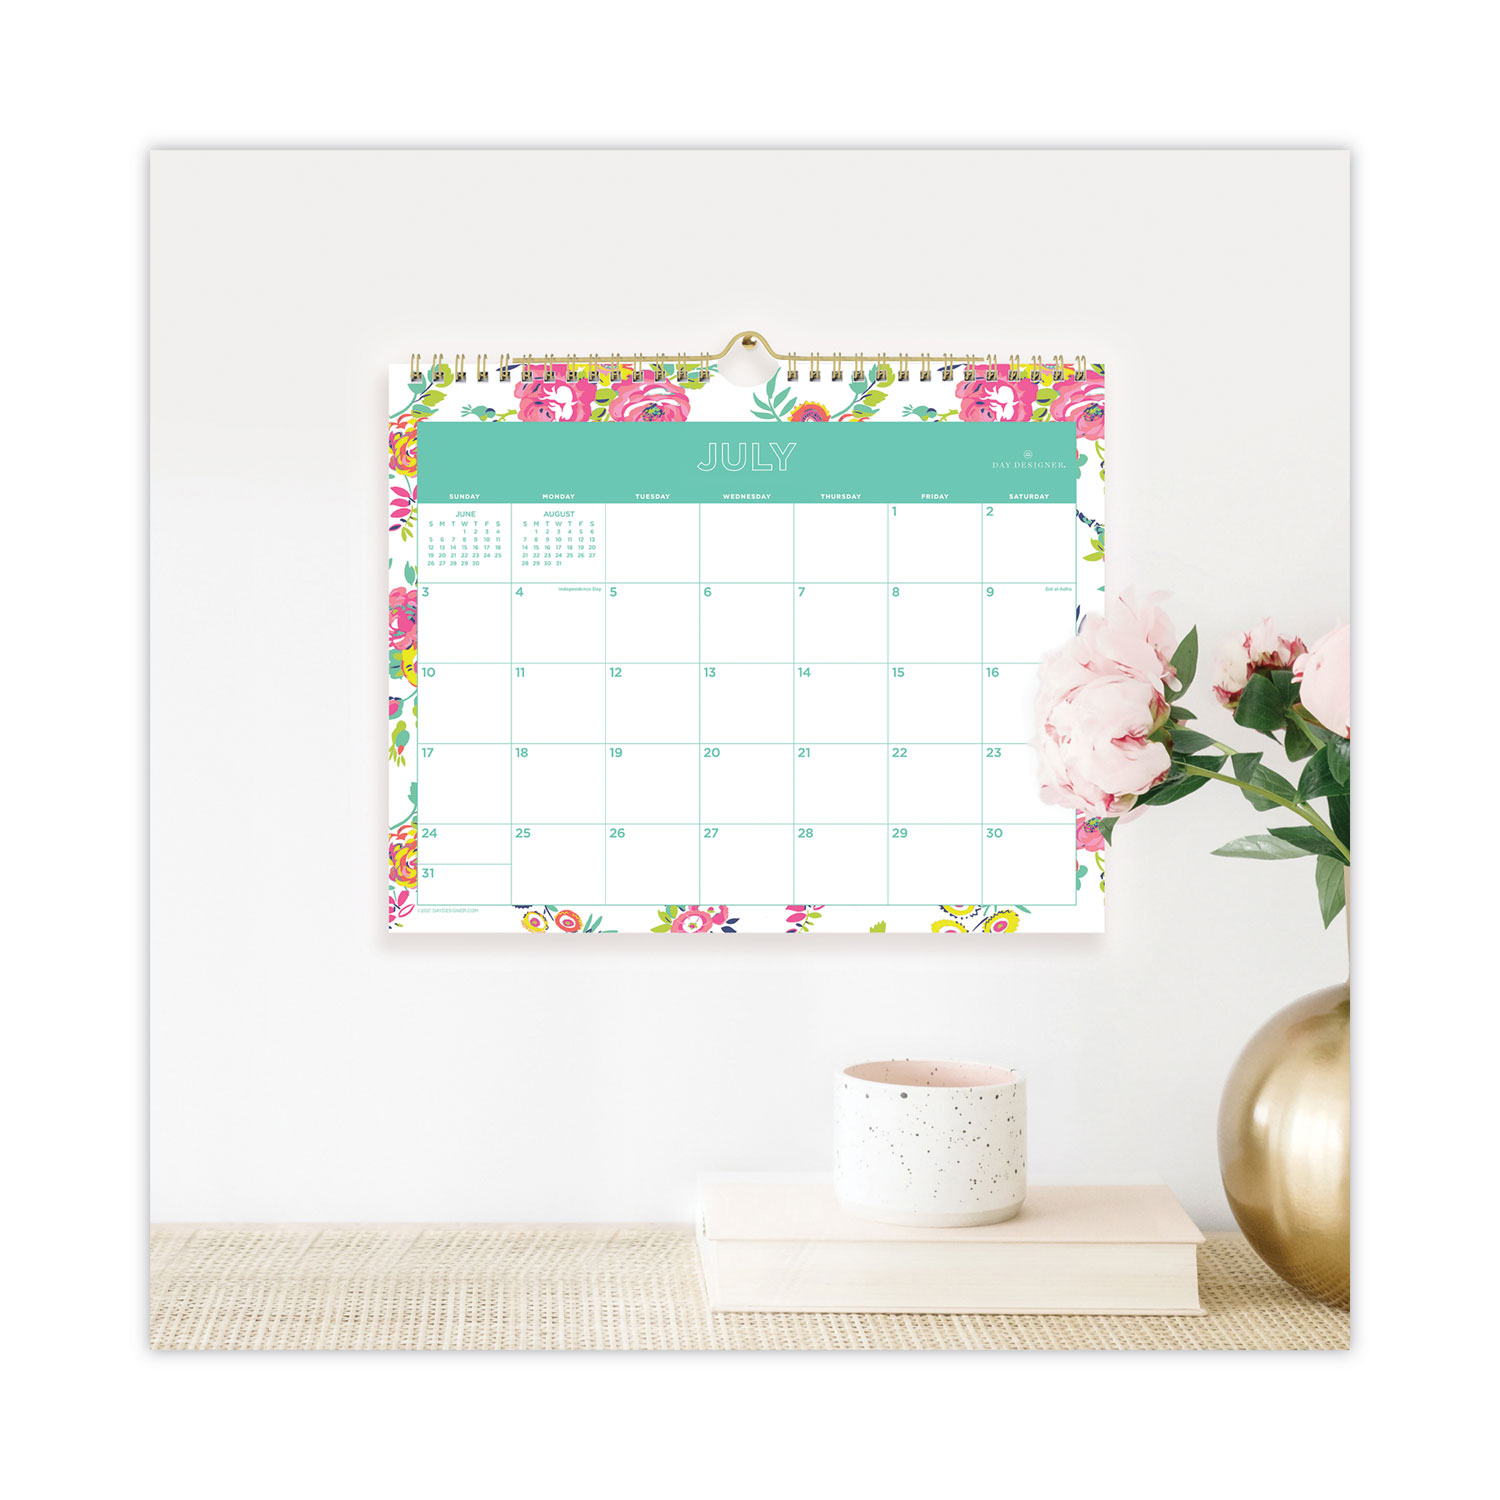 11 x 8.75 Peyton White Floral Twin Wire Binding Day Designer for Blue Sky 2019-2020 Academic Year Monthly Wall Calendar 